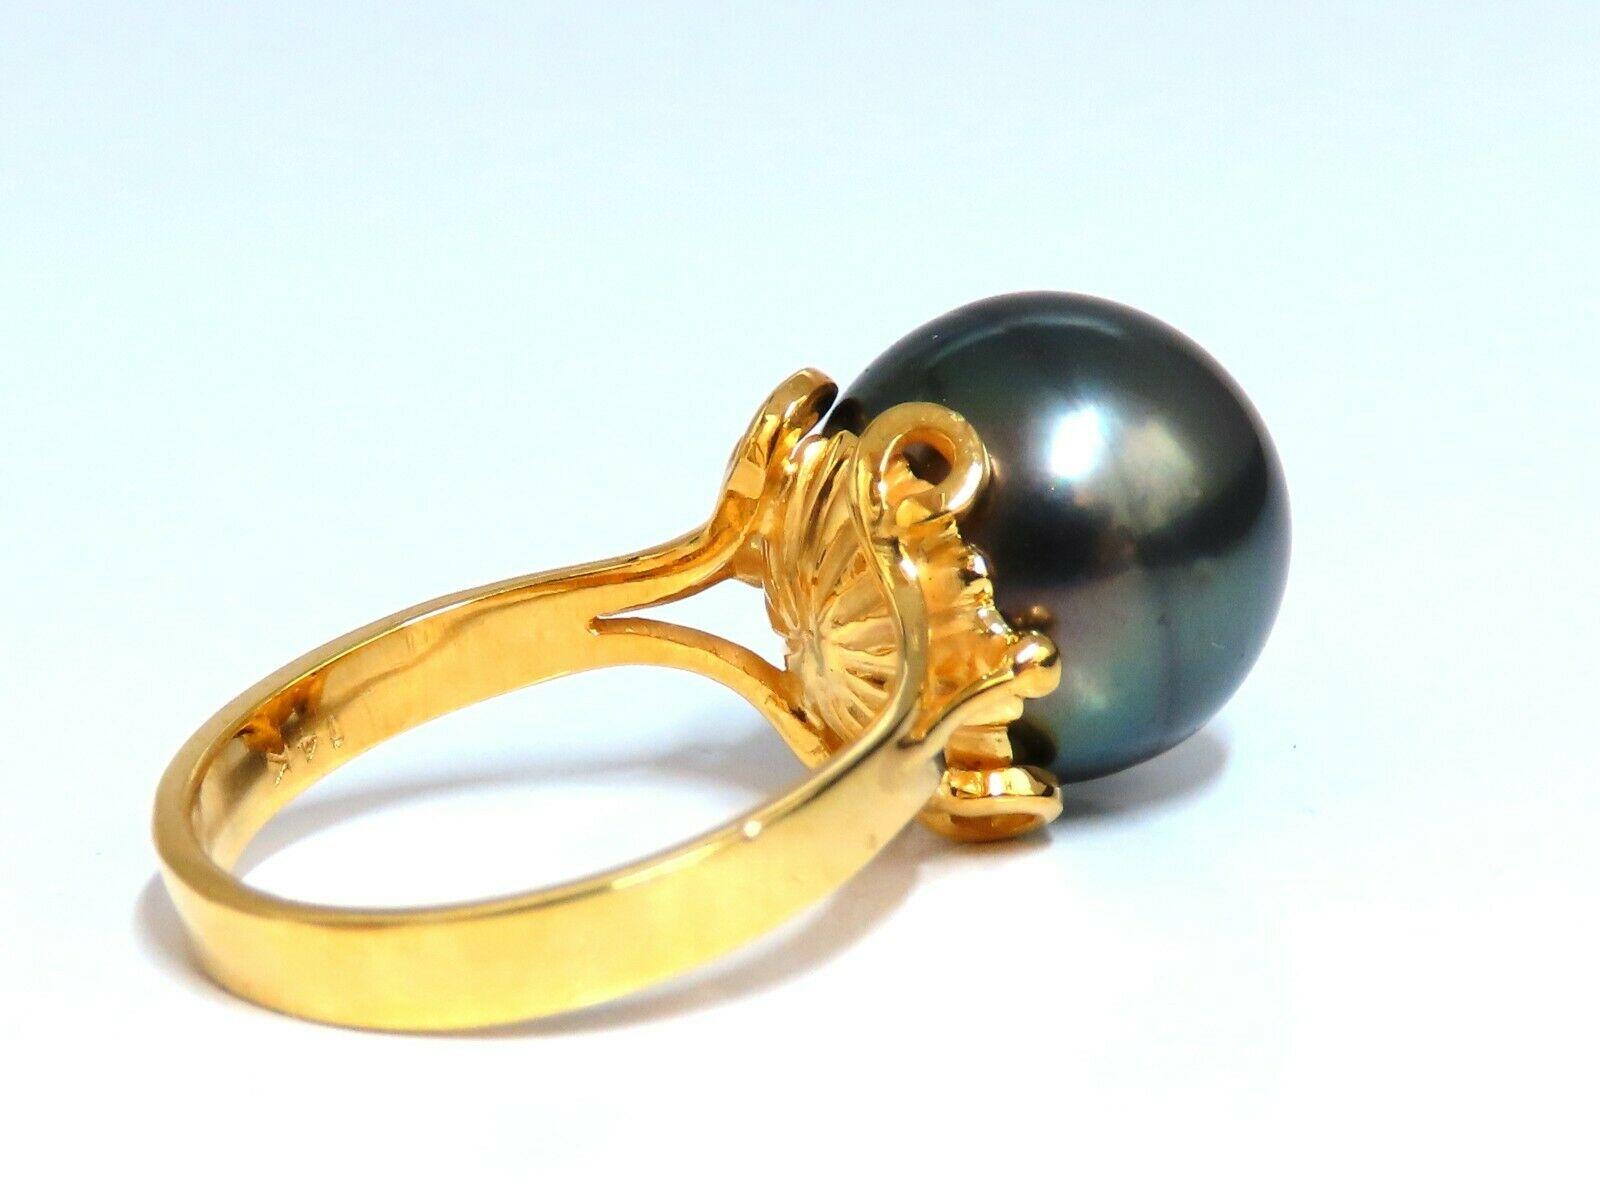 Black Tahitian Within Petals

12.5mm natural Tahitian Peacock pearl ring

  Green Overtone, Fine luster.

14kt. yellow gold

5.6 grams.

Current ring size: 6

Depth of ring: 13.4mm

We may resize, Slightly.